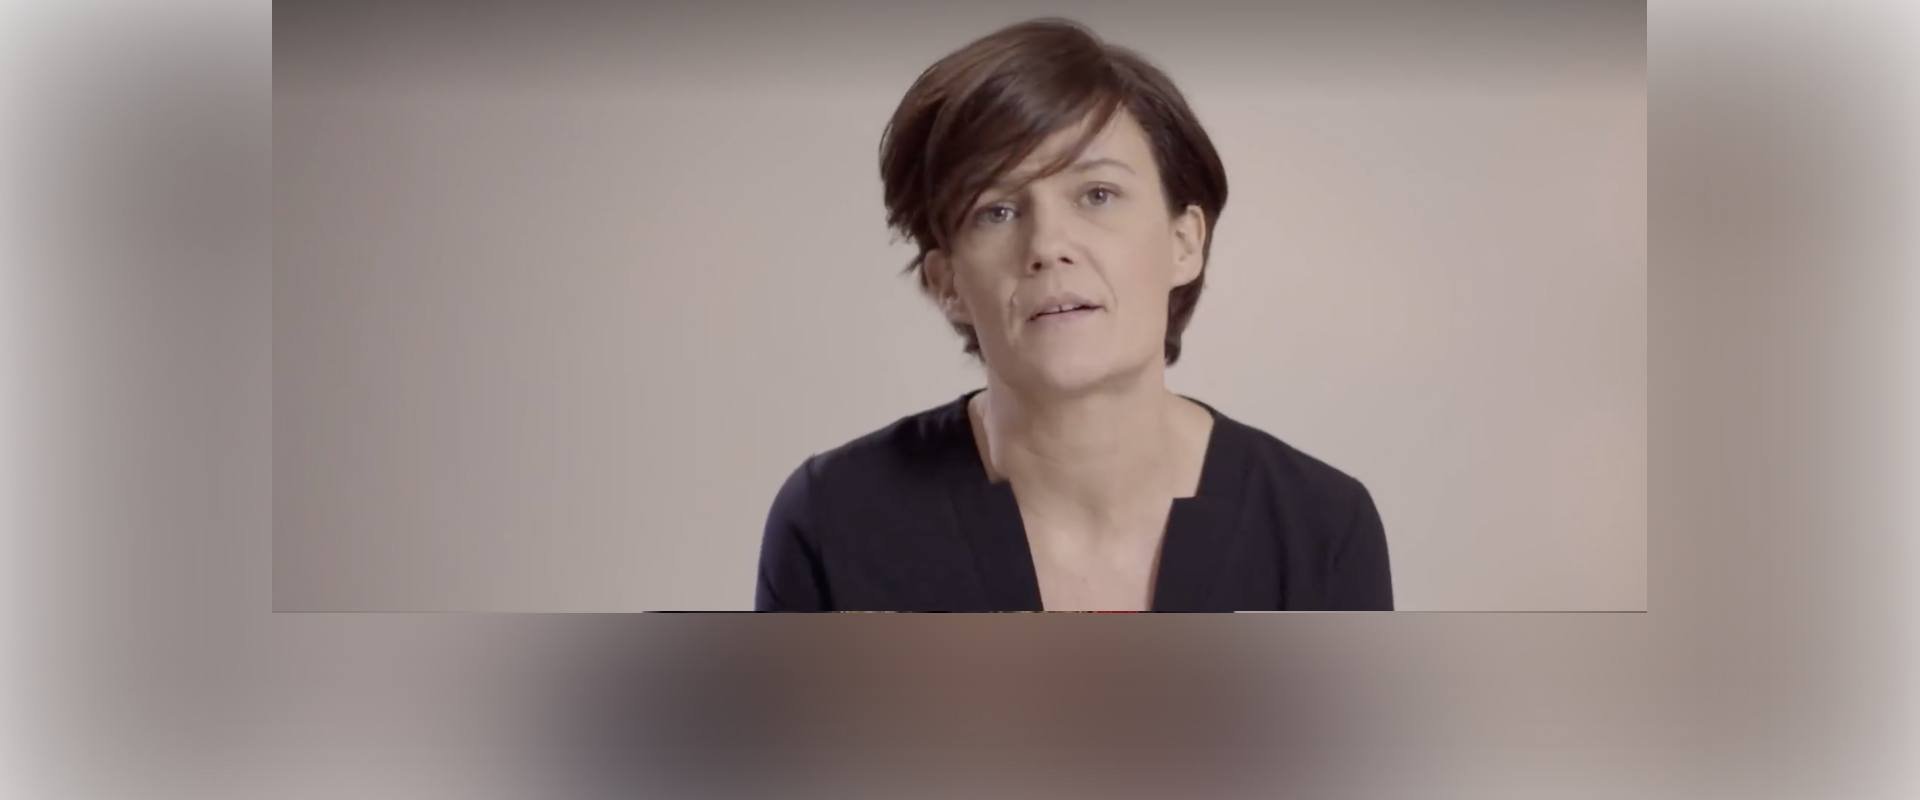 L'Oréal Groupe Videos Commitments: L'Oréal Stands for Human Rights: Climate  Change and Gender